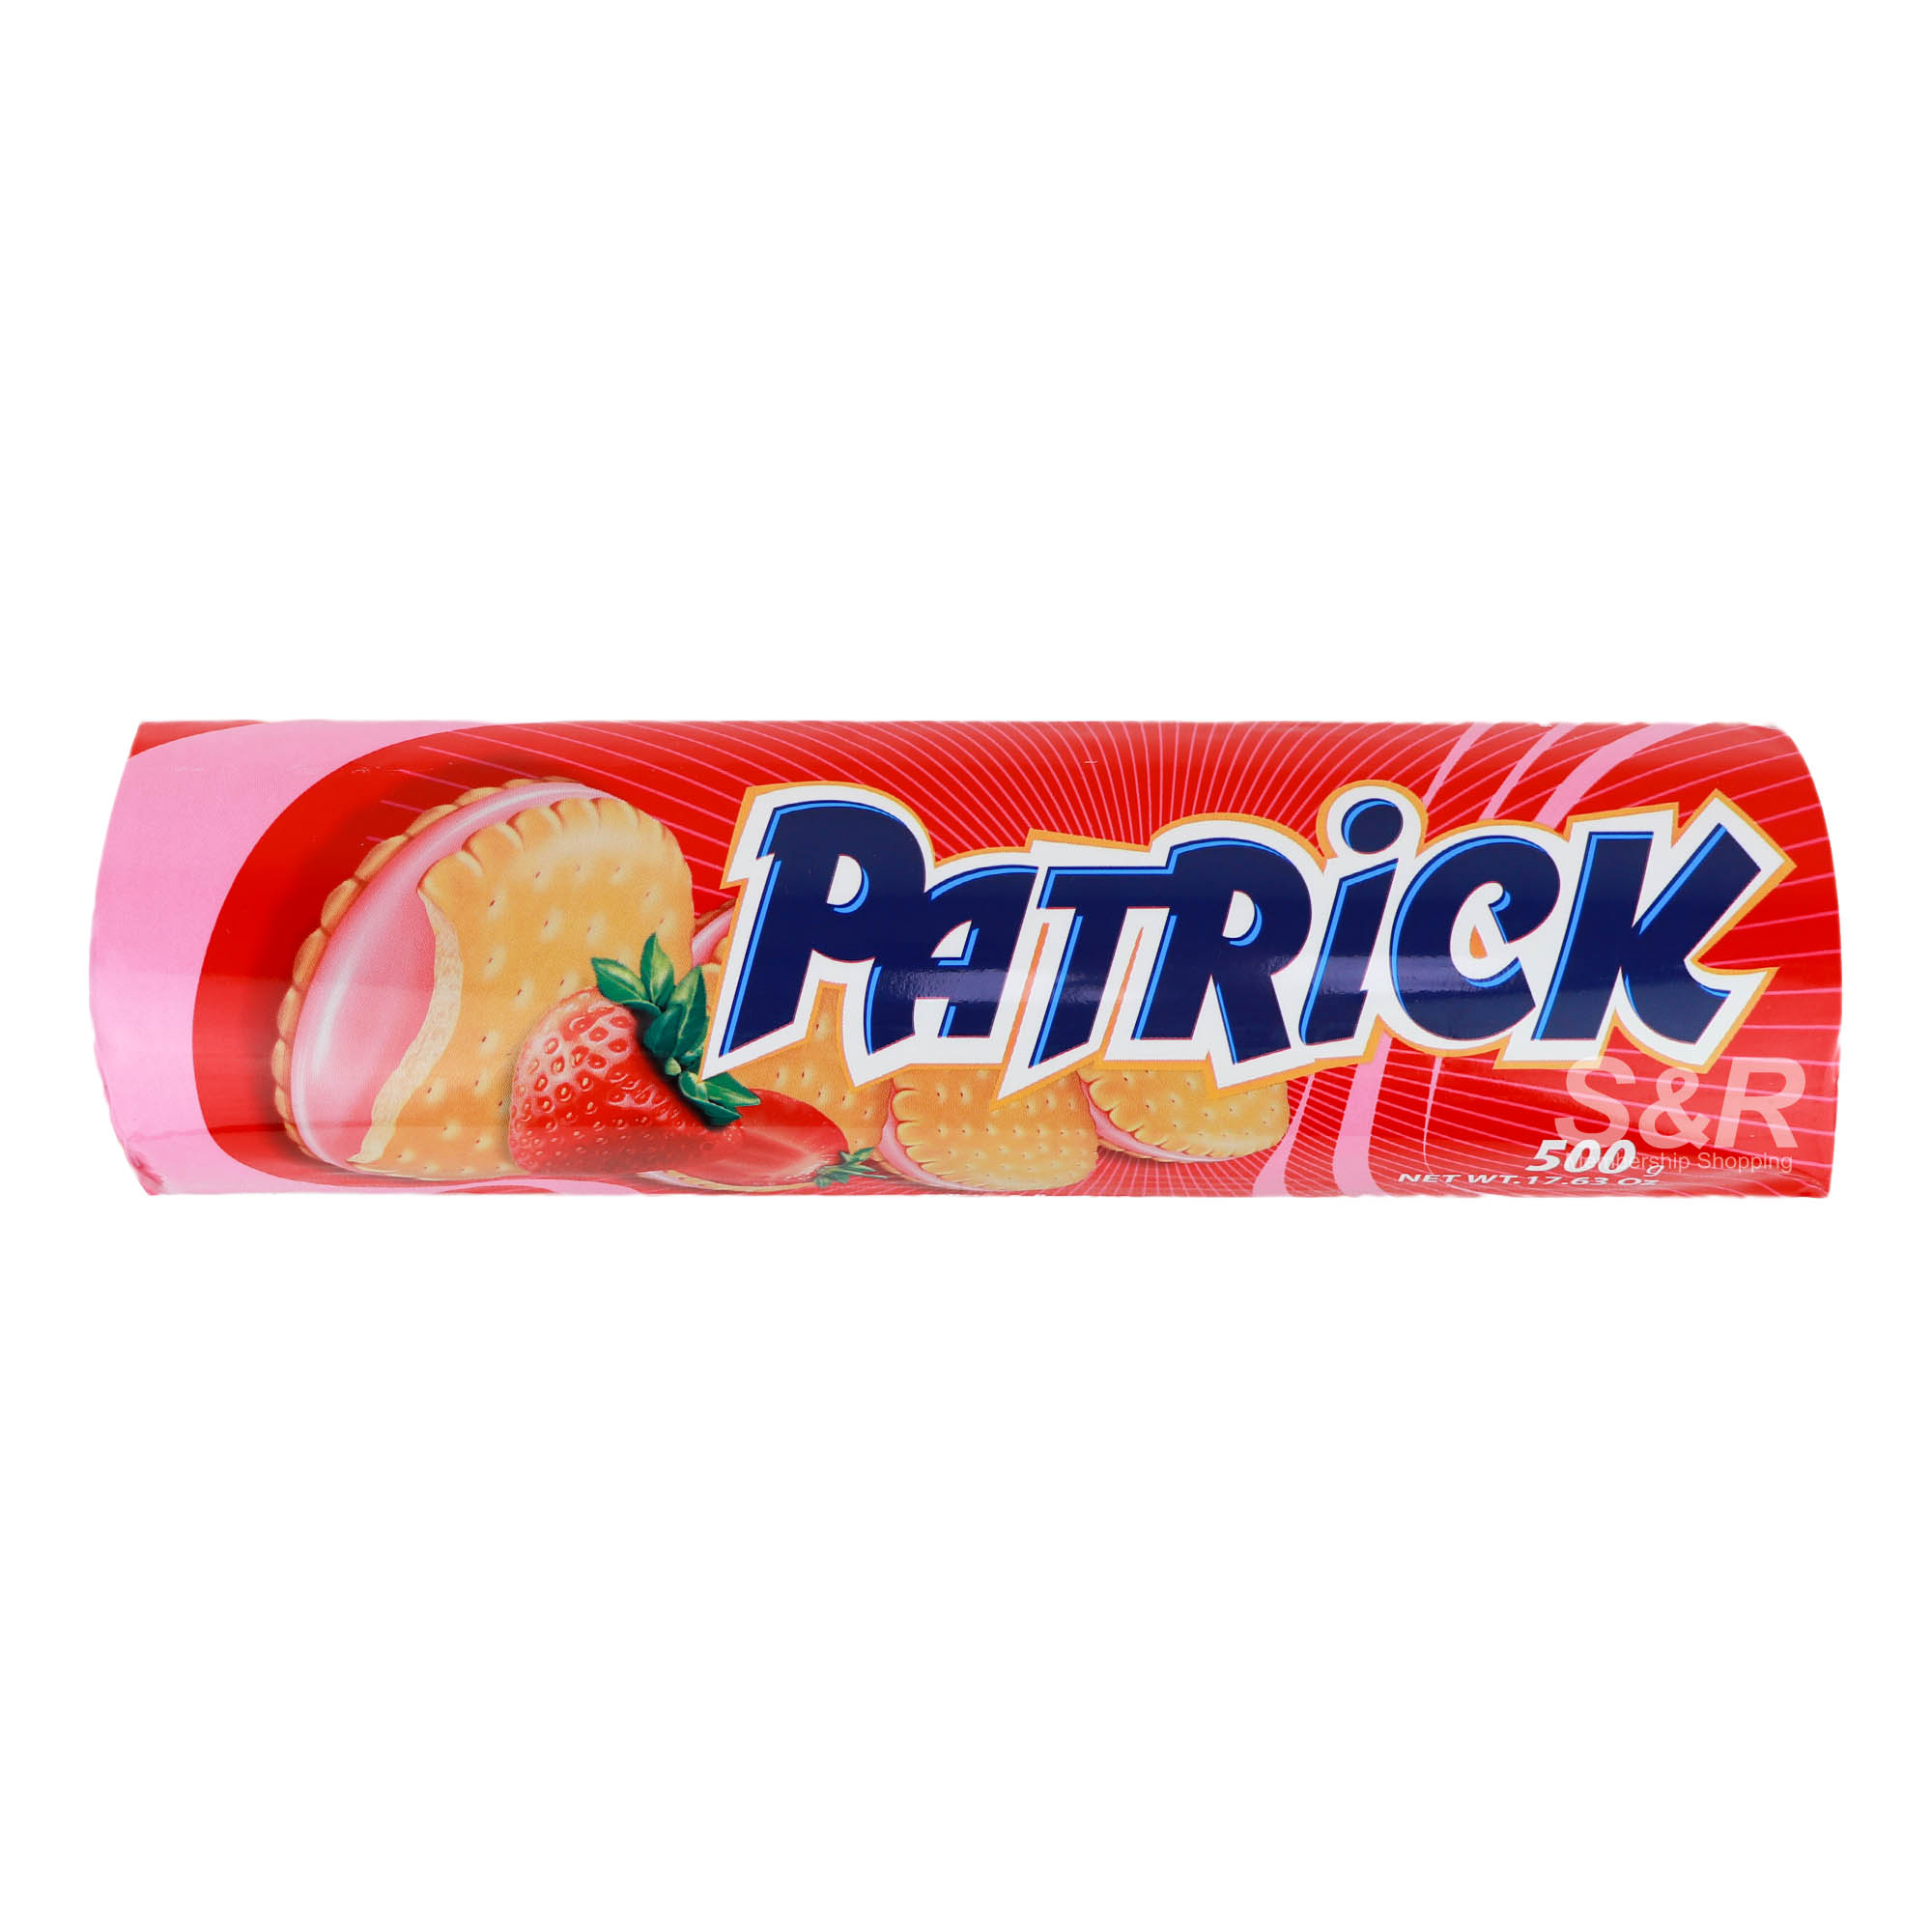 Patrick Strawberry Flavor Filled Biscuits 500g